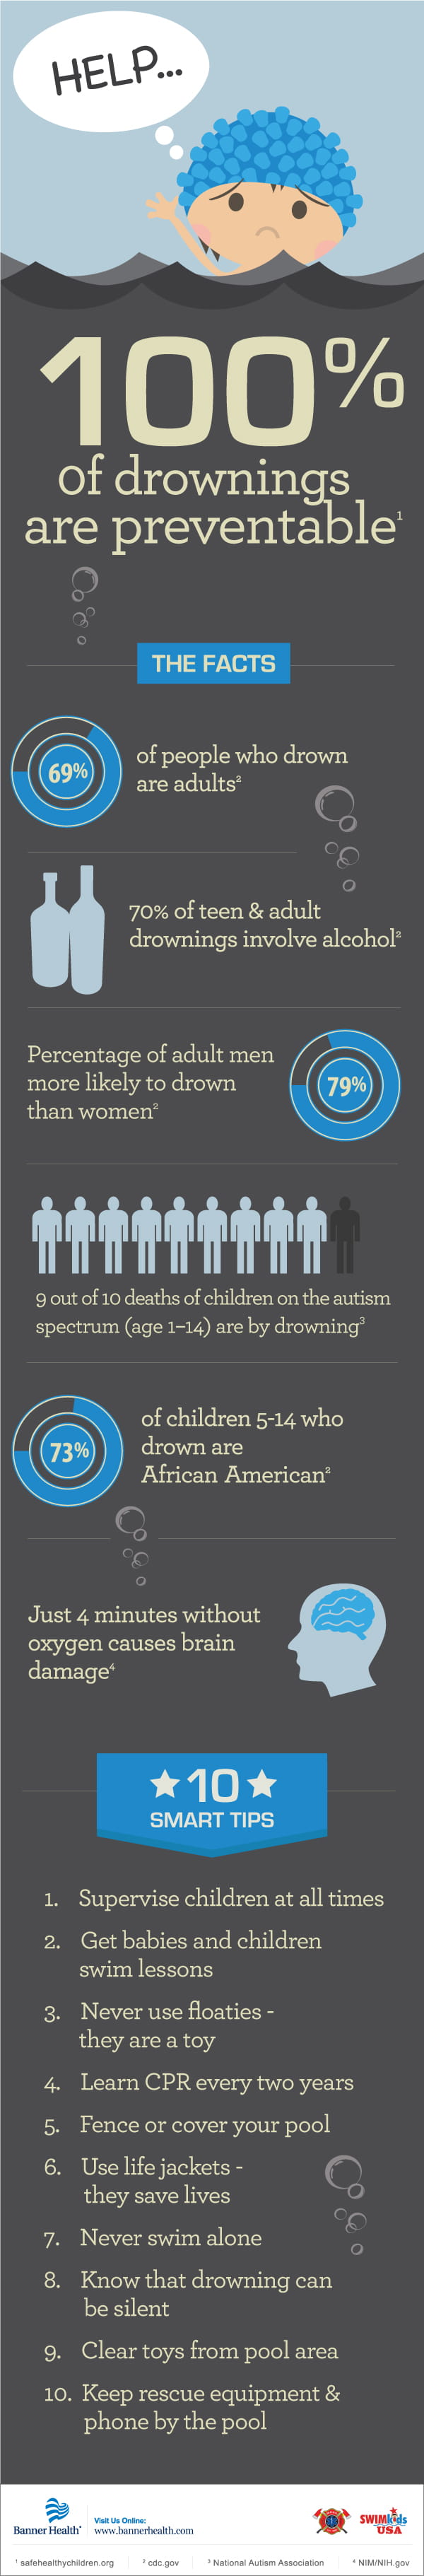 infographic_drowningpreventionml